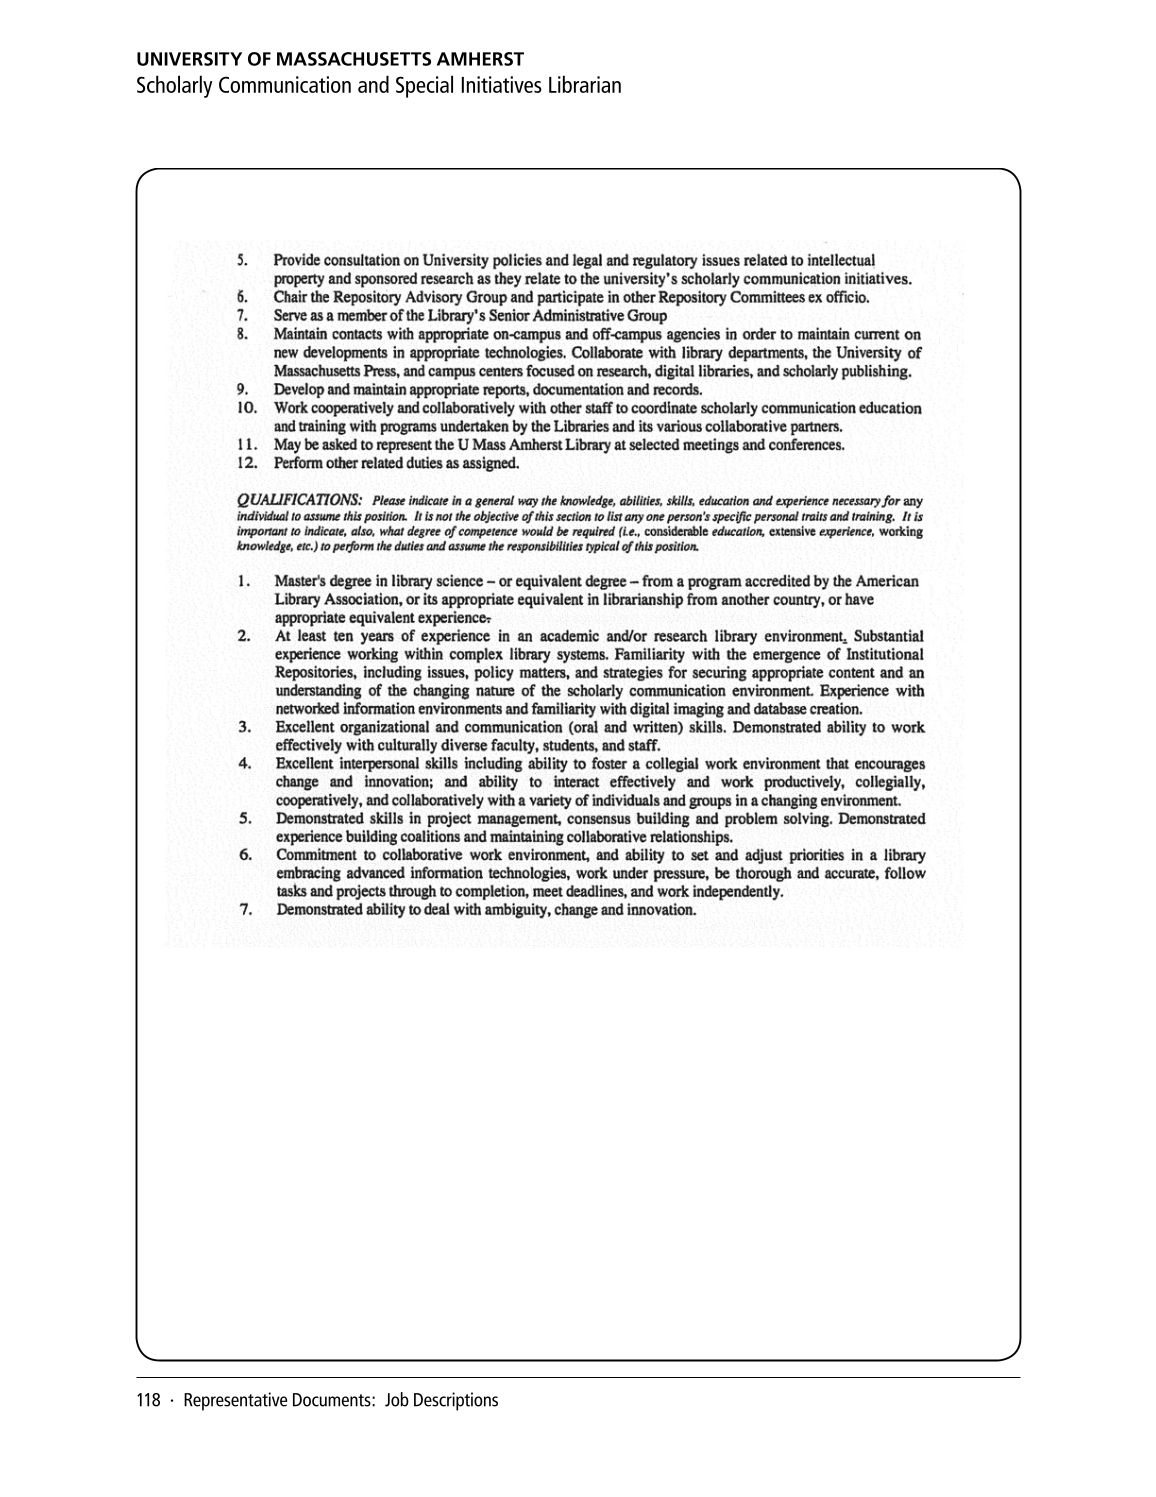 SPEC Kit 346: Scholarly Output Assessment Activities (May 2015) page 118